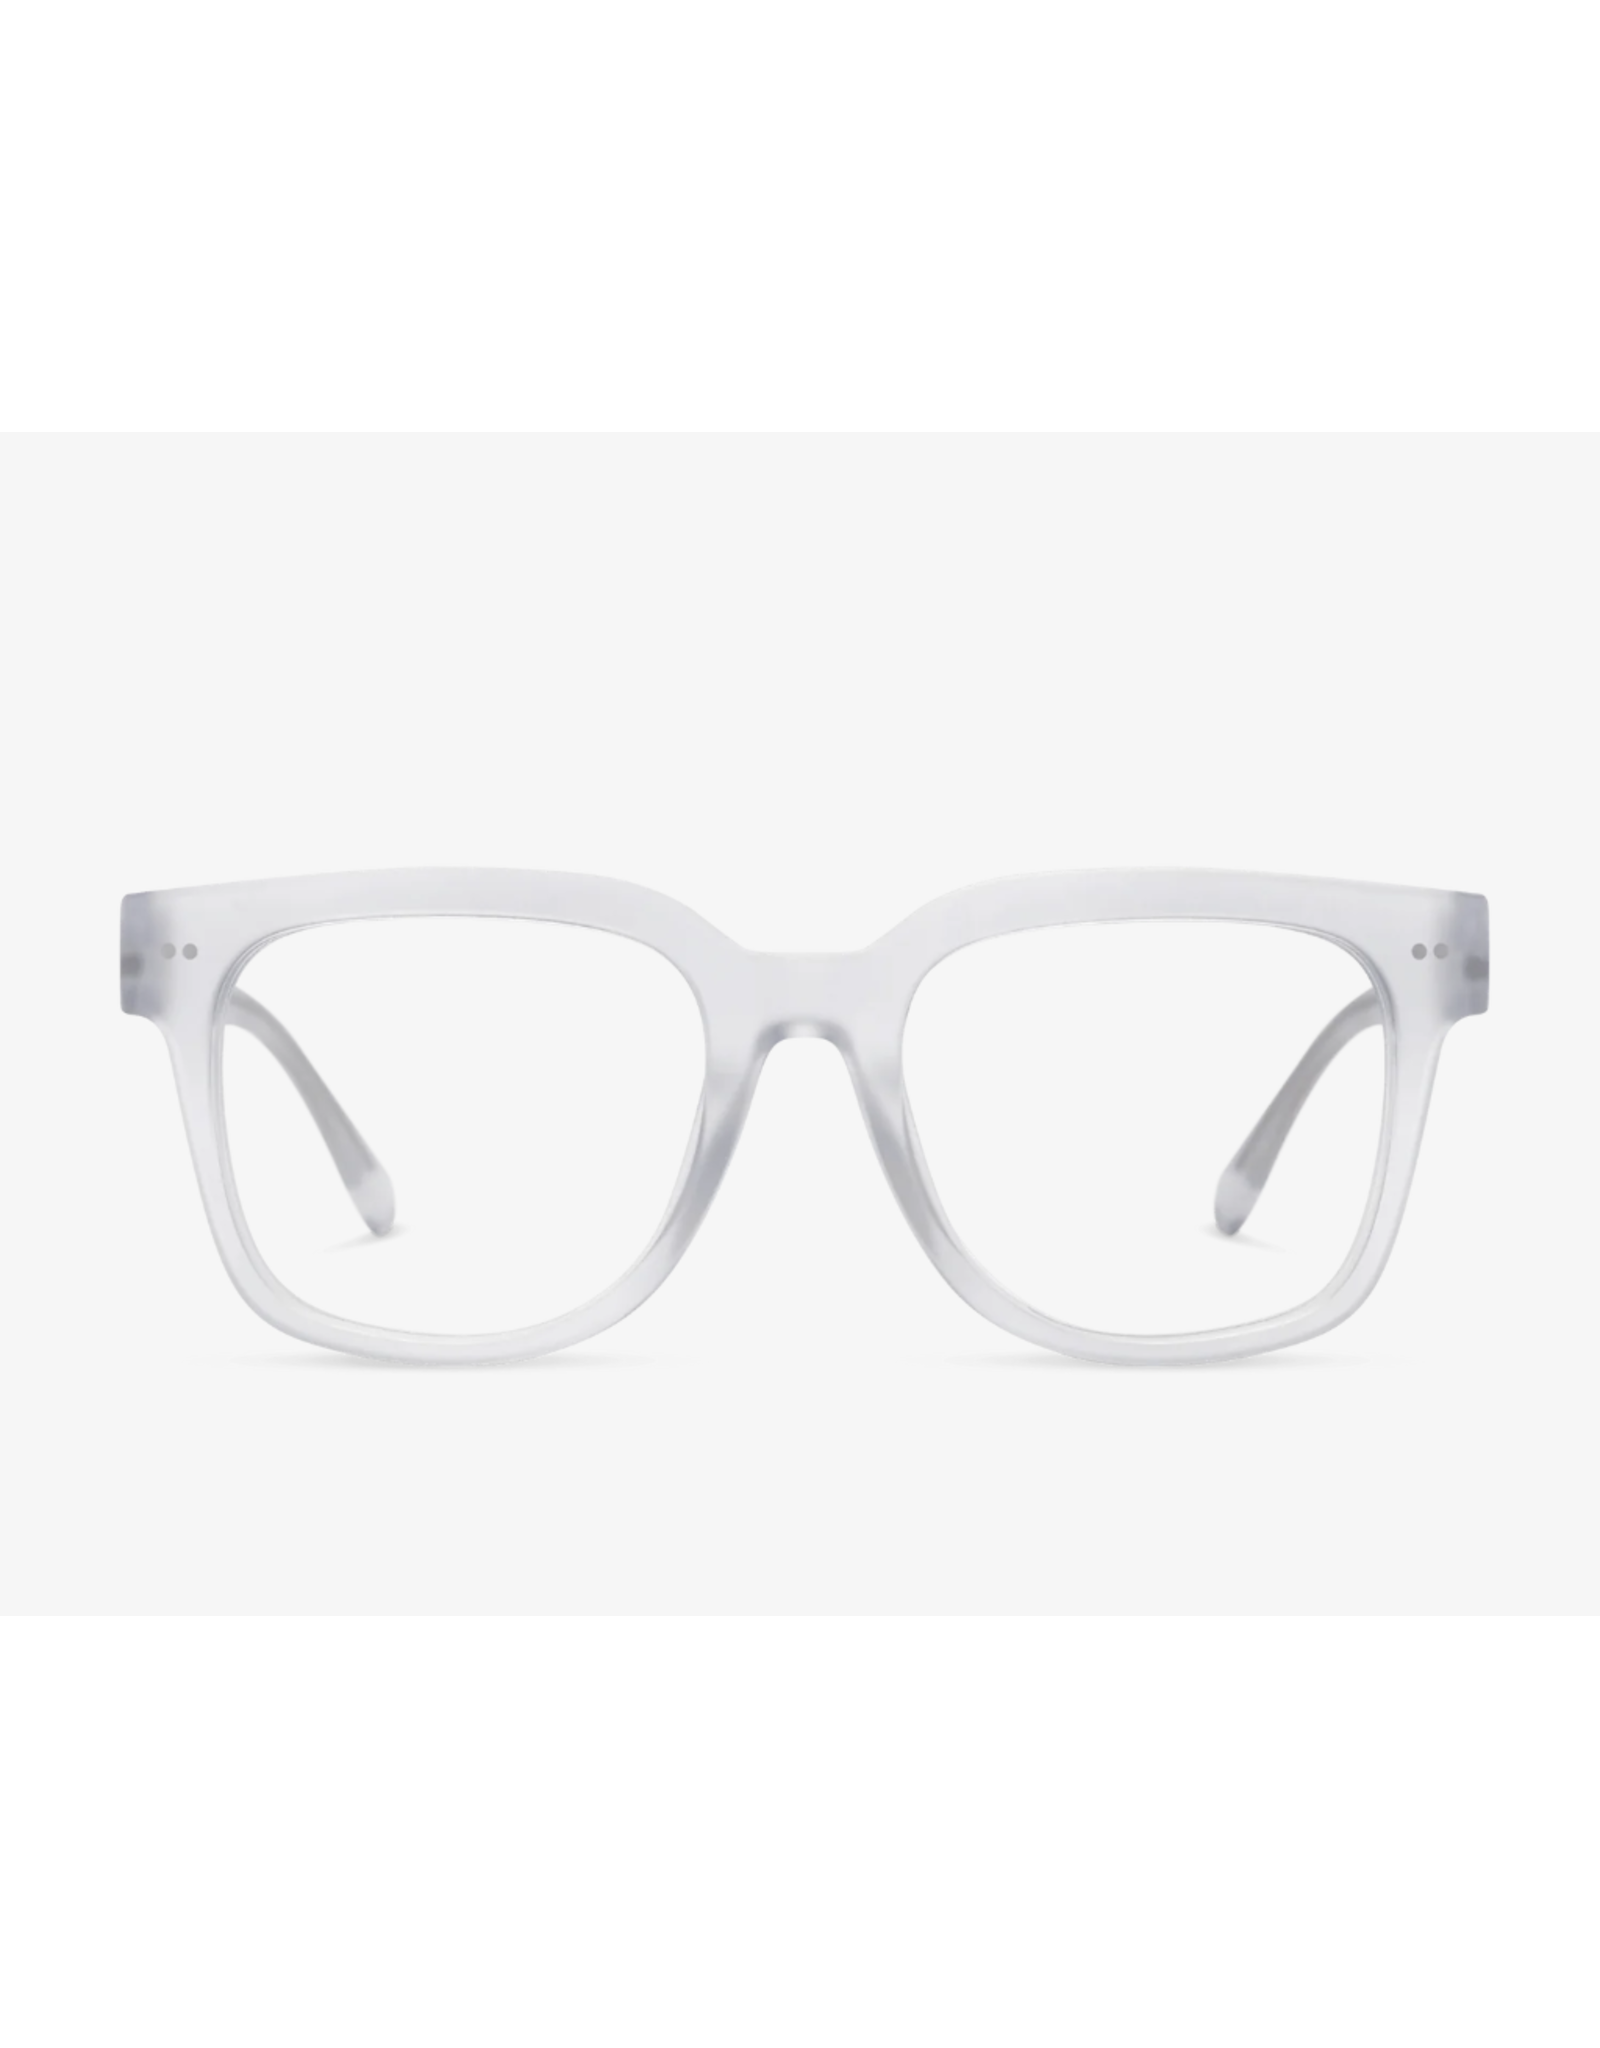 LOOK Laurel Readers in Clear, 2.5 Magnification